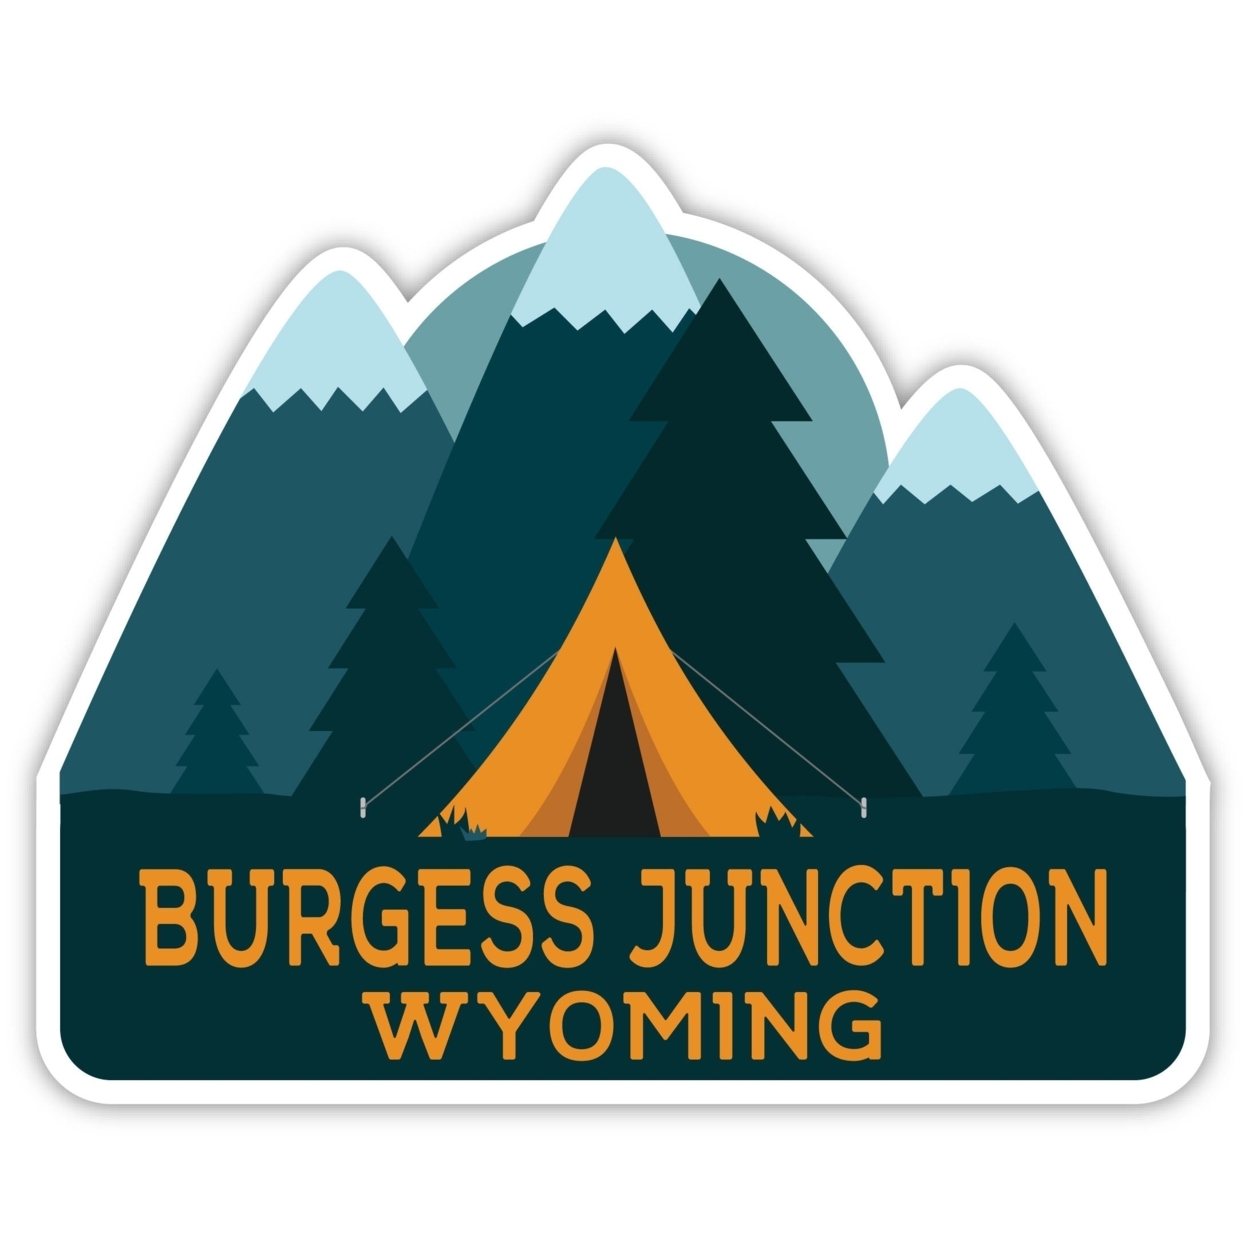 Burgess Junction Wyoming Souvenir Decorative Stickers (Choose Theme And Size) - 4-Pack, 10-Inch, Bear